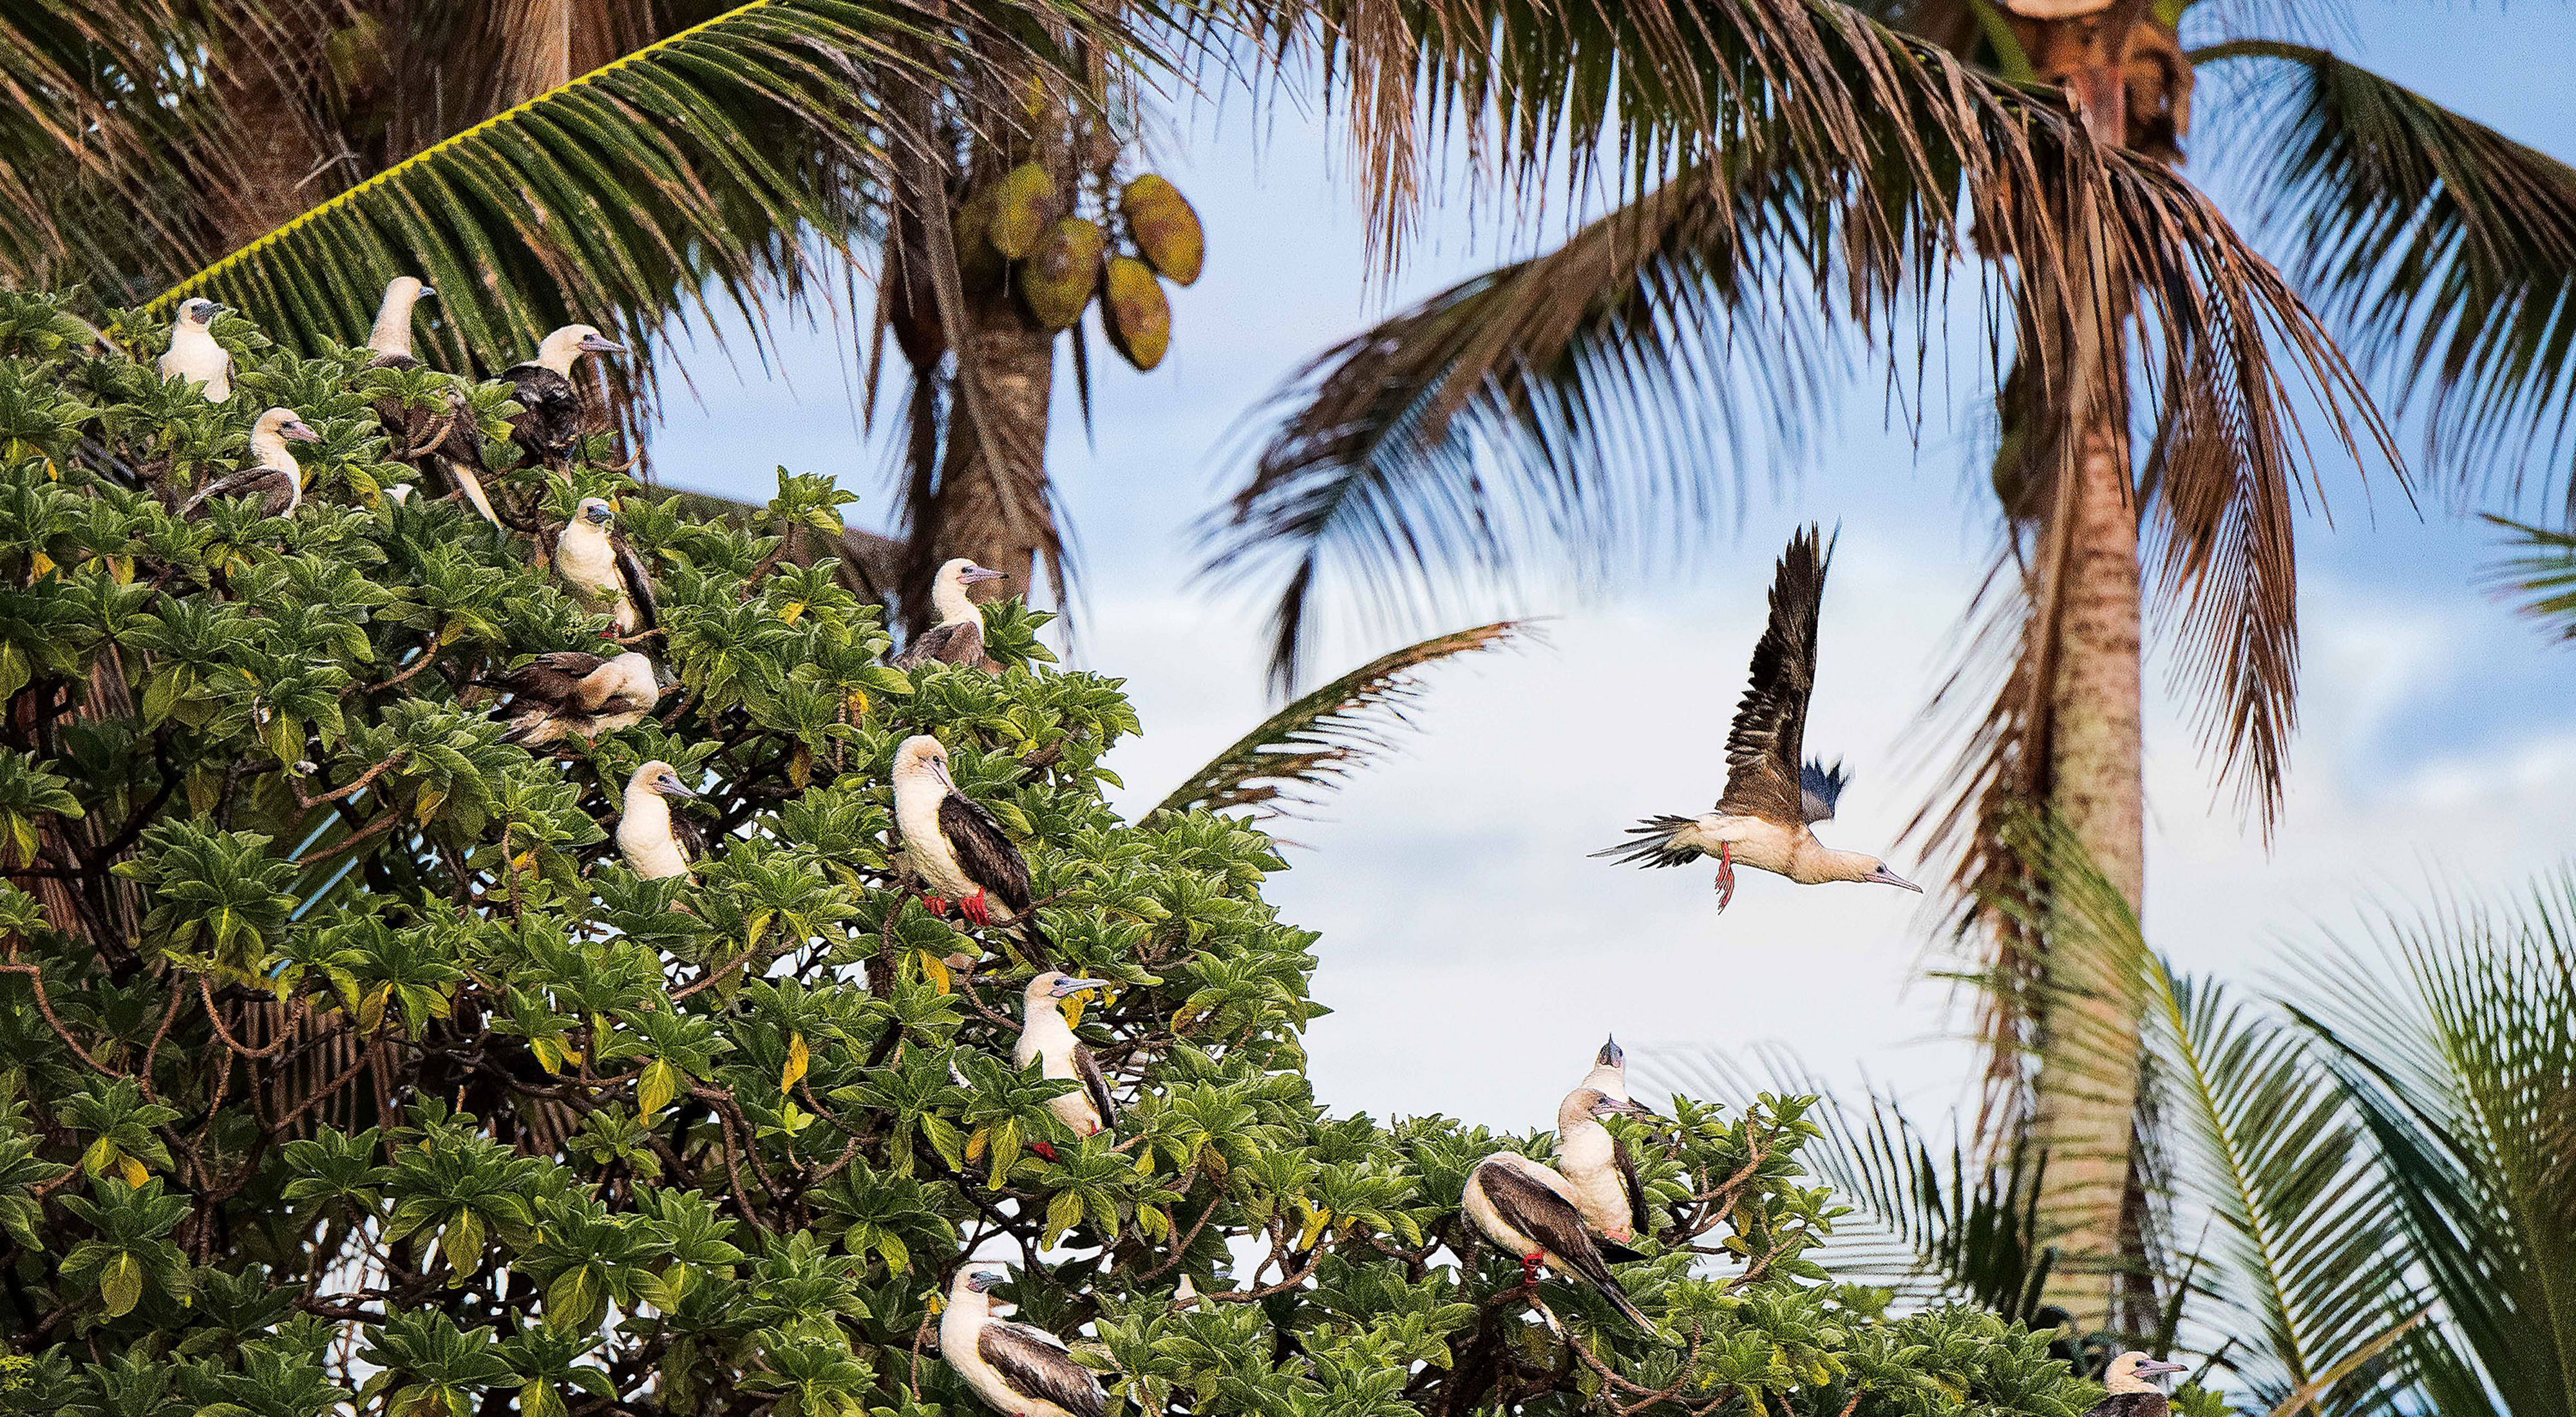 Numerous white and gray seabirds in green trees with palm trees in background.